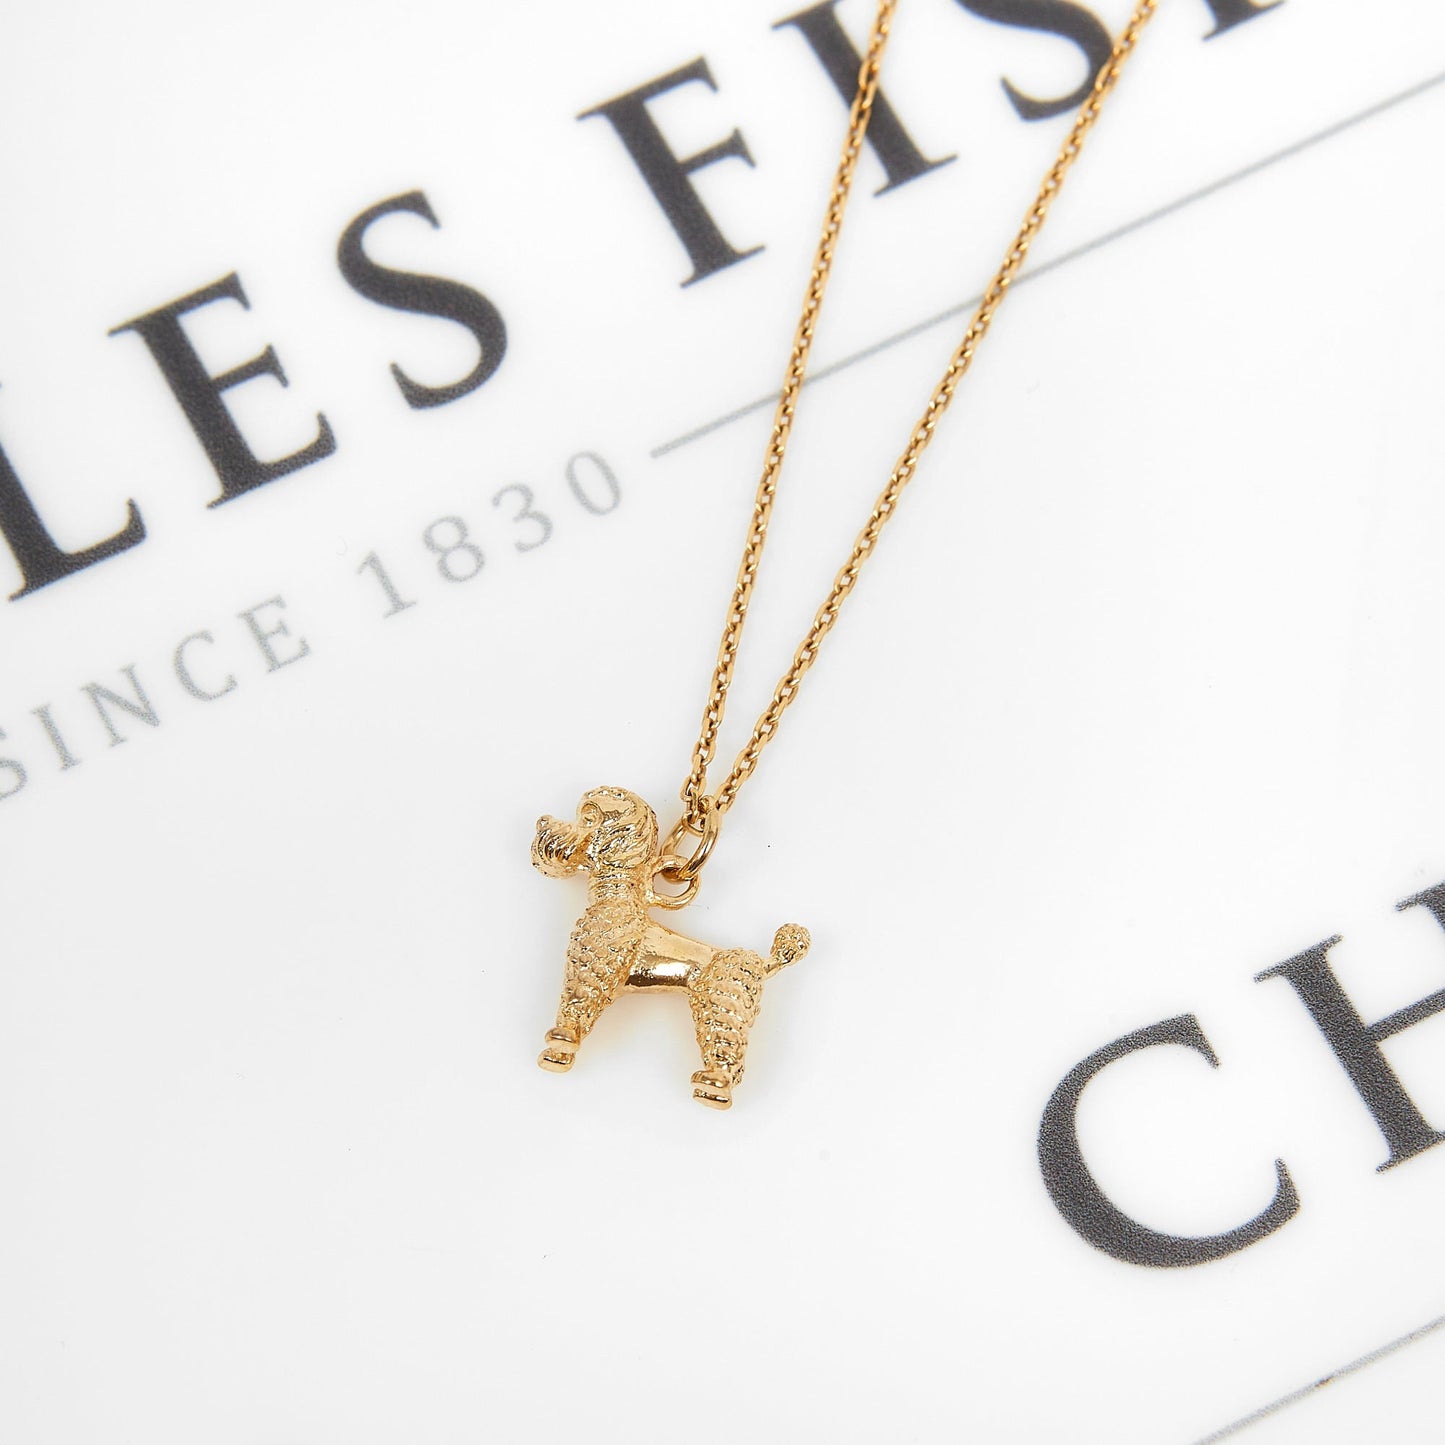 Pre-Owned 9ct Gold Poodle Dog Charm